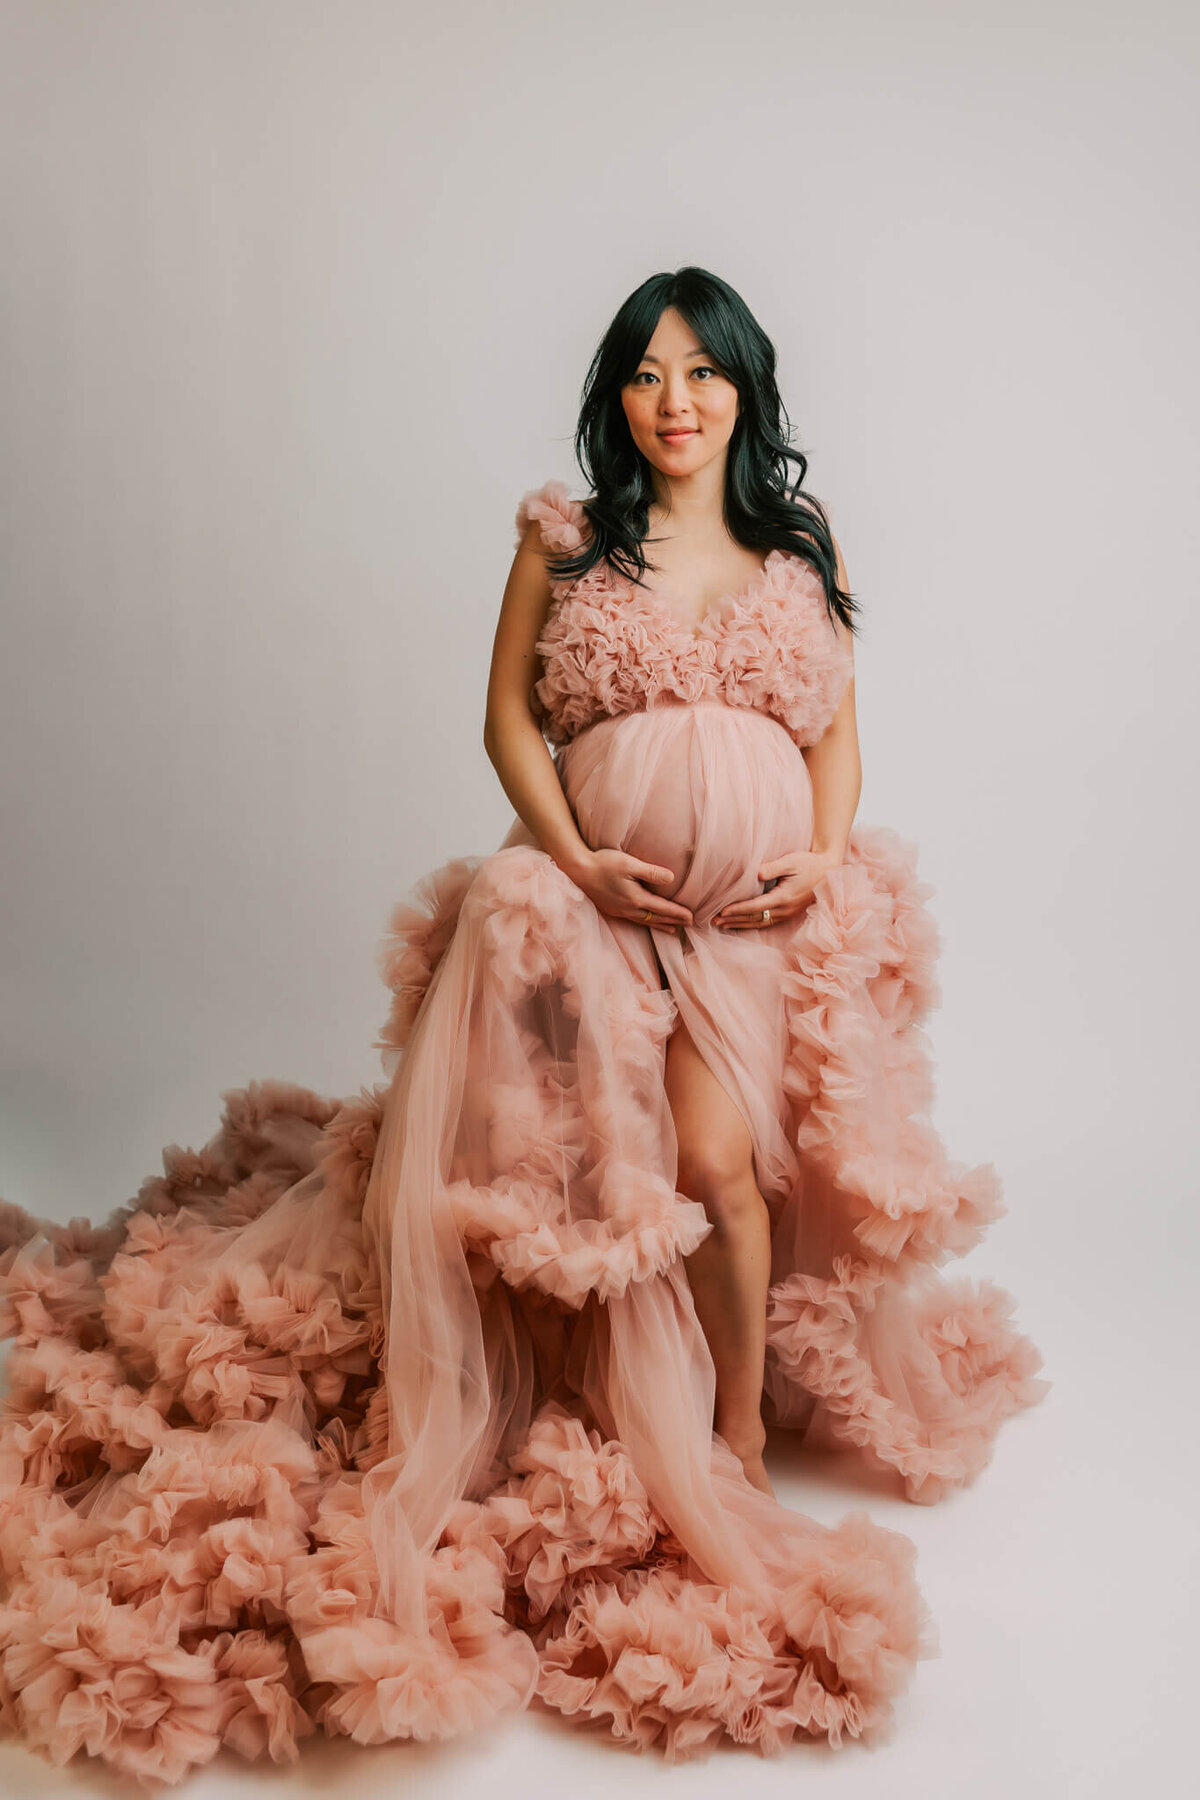 standing pregnant woman in pink tulle gown. she is looking at the camera and smiling